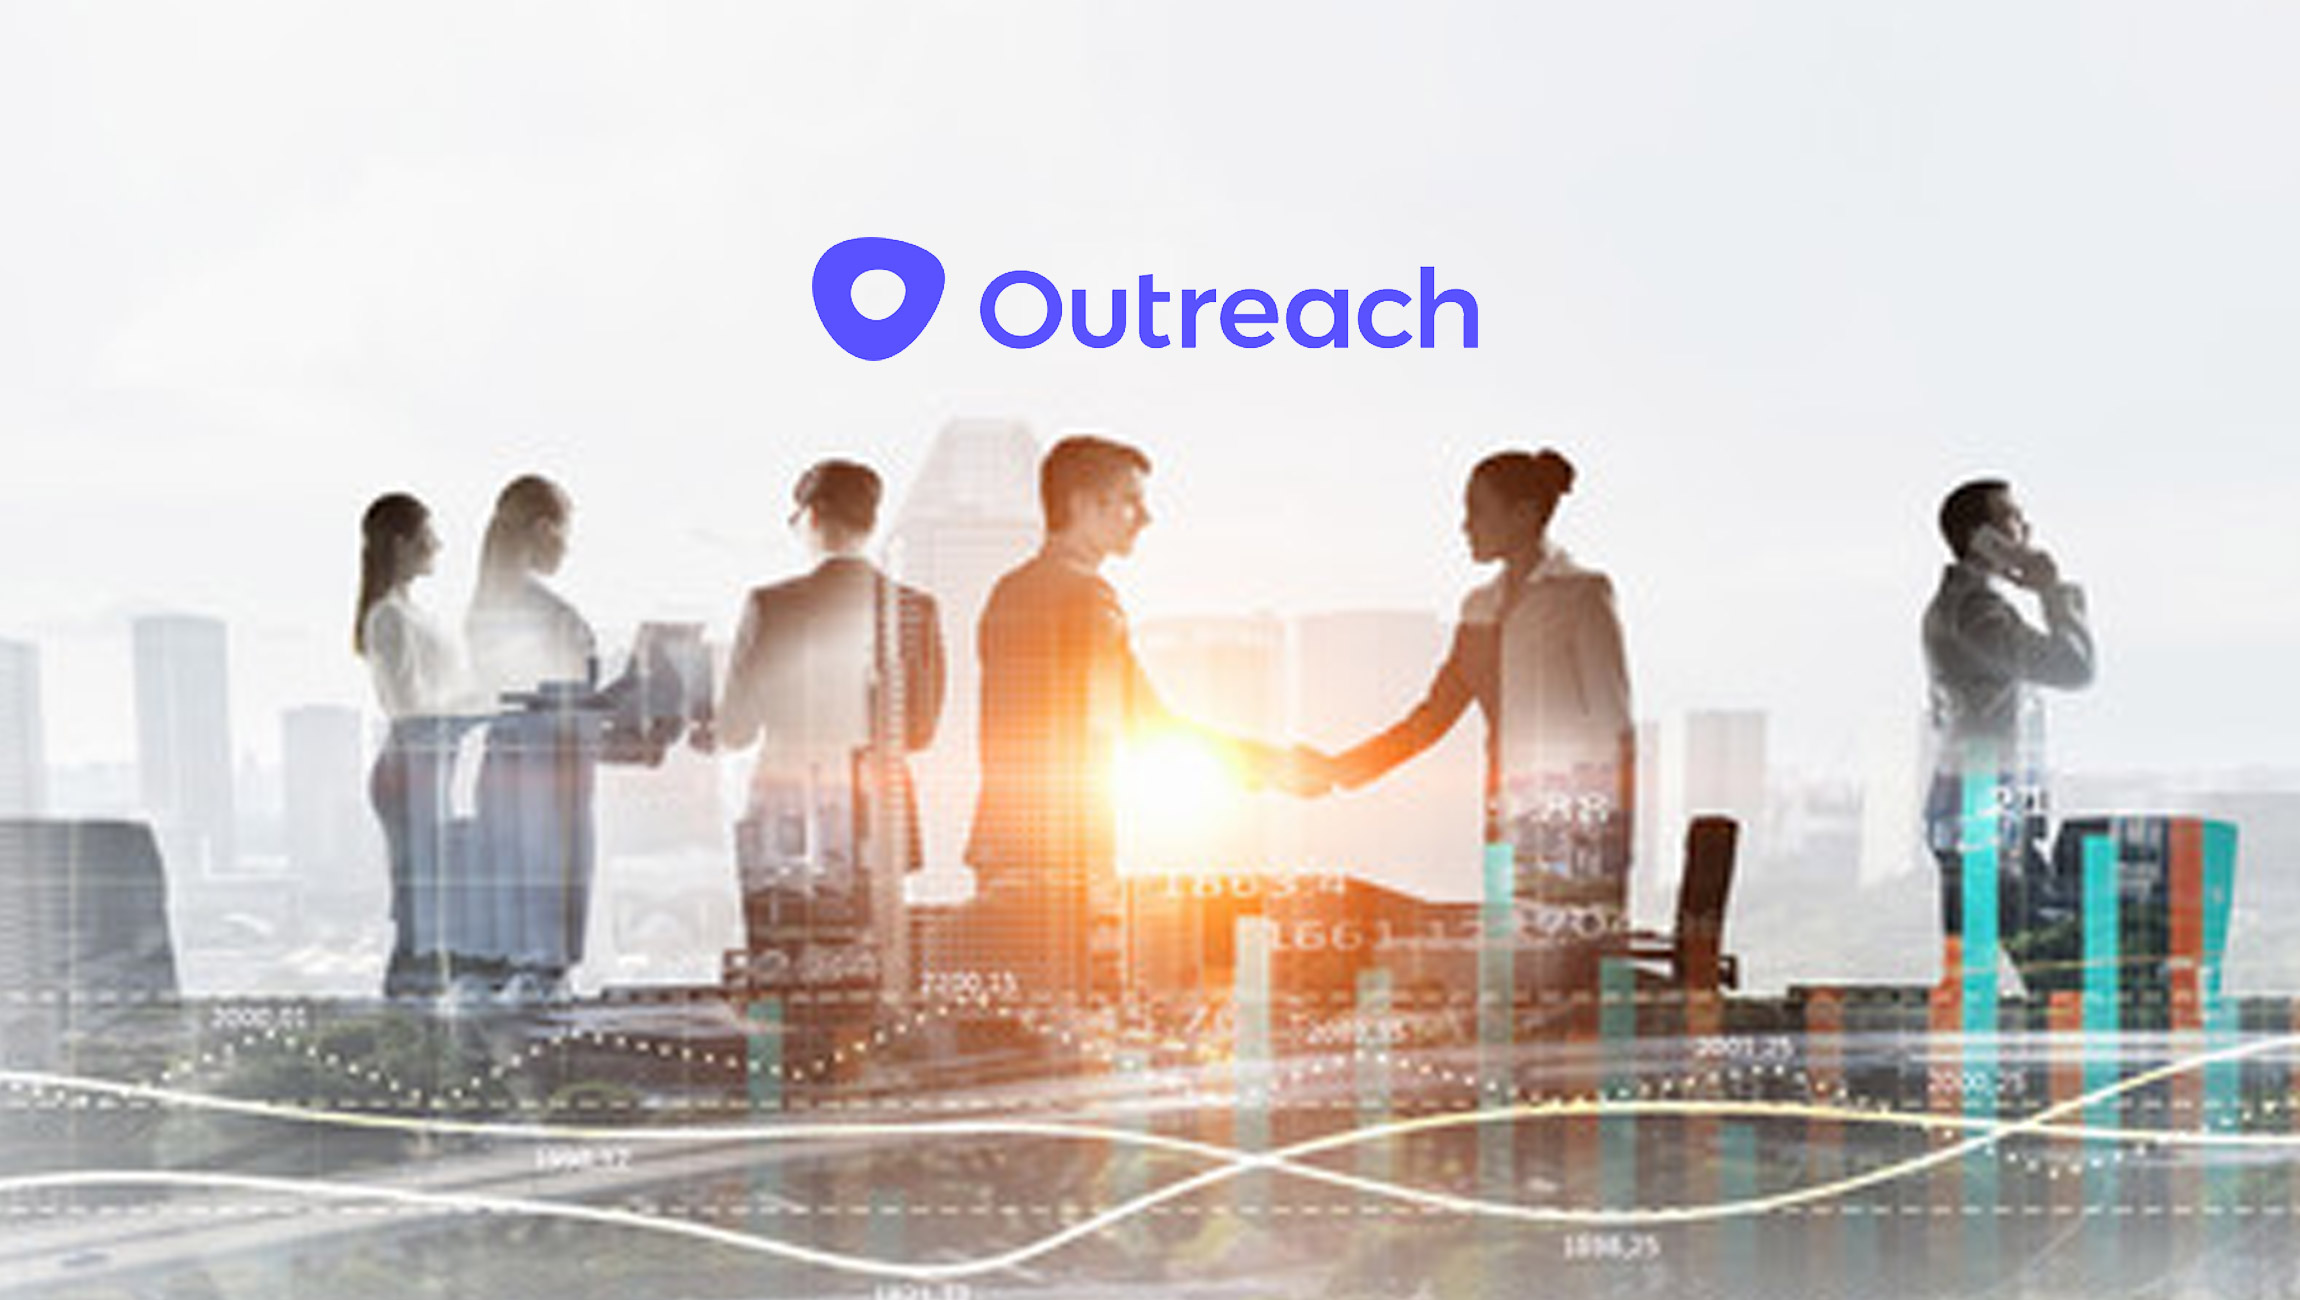 Outreach Named a Leader in Sales Engagement evaluation by Independent Research Firm